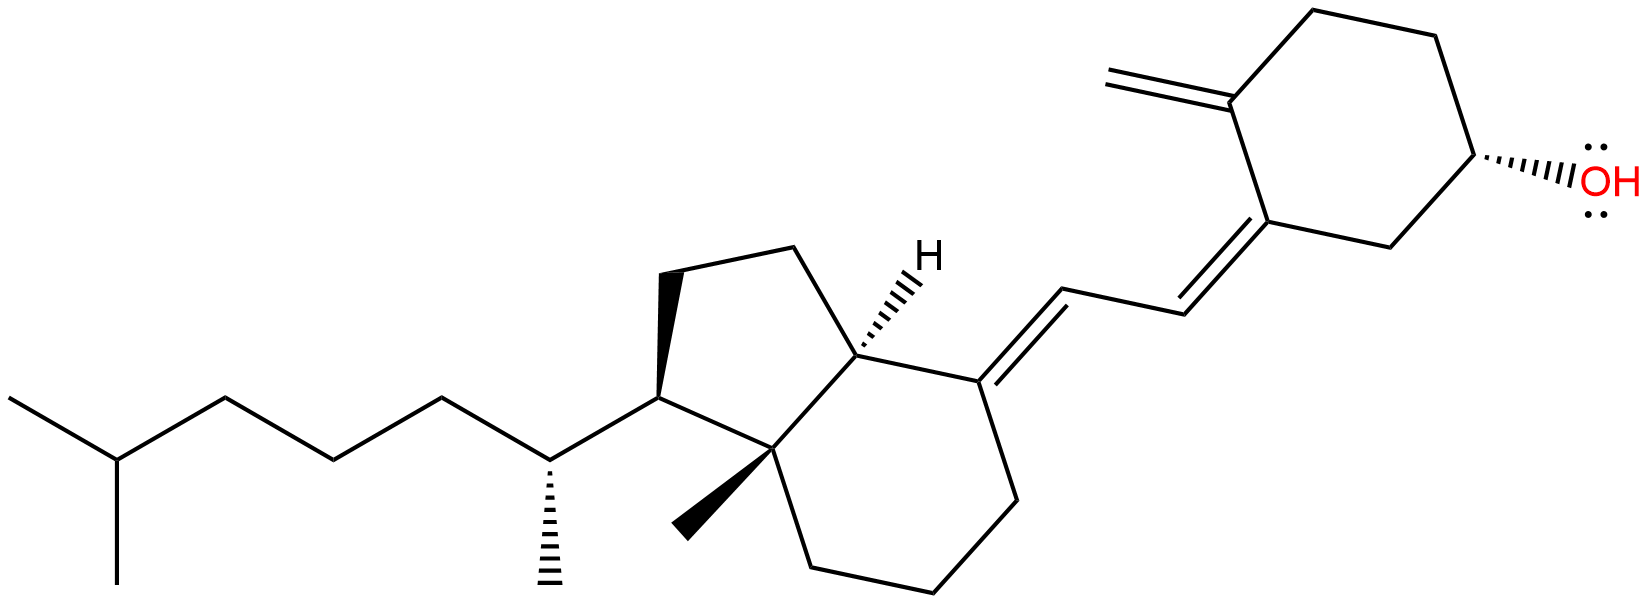 c27h44o lewis structure